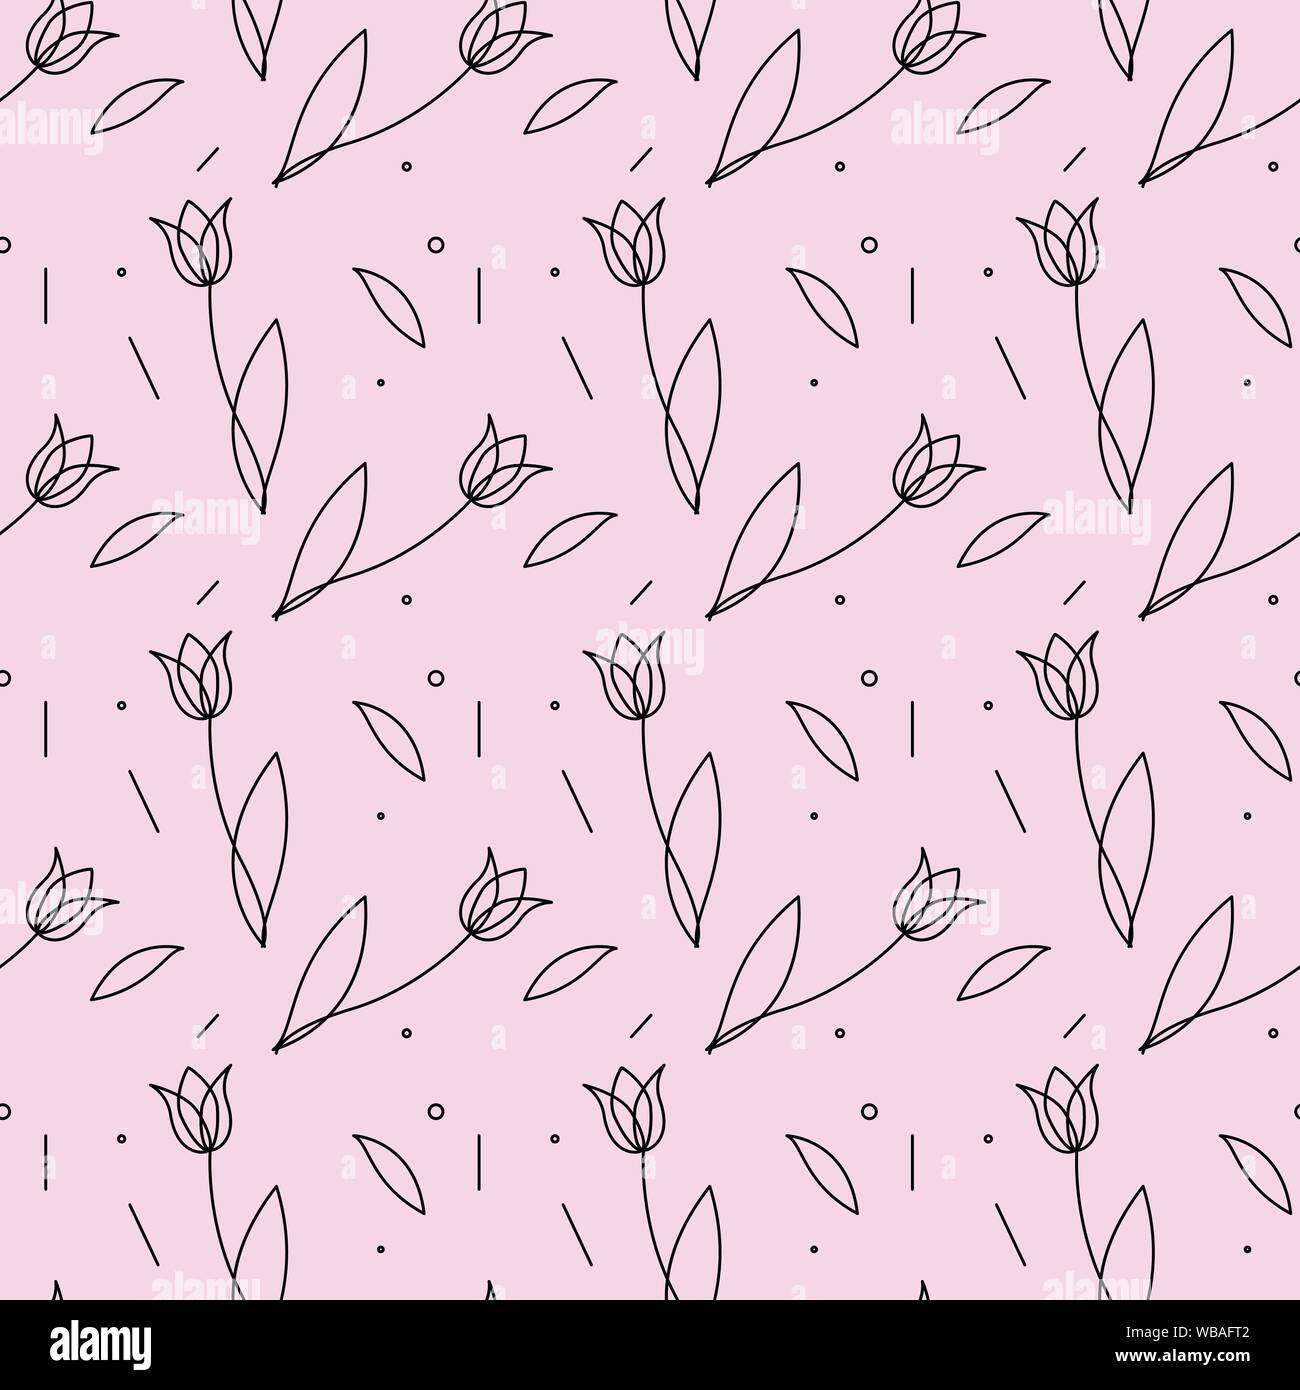 Tulips seamless pattern. Vector simple background. Modern flower design for fabric, wrapping paper, background. Stock Vector